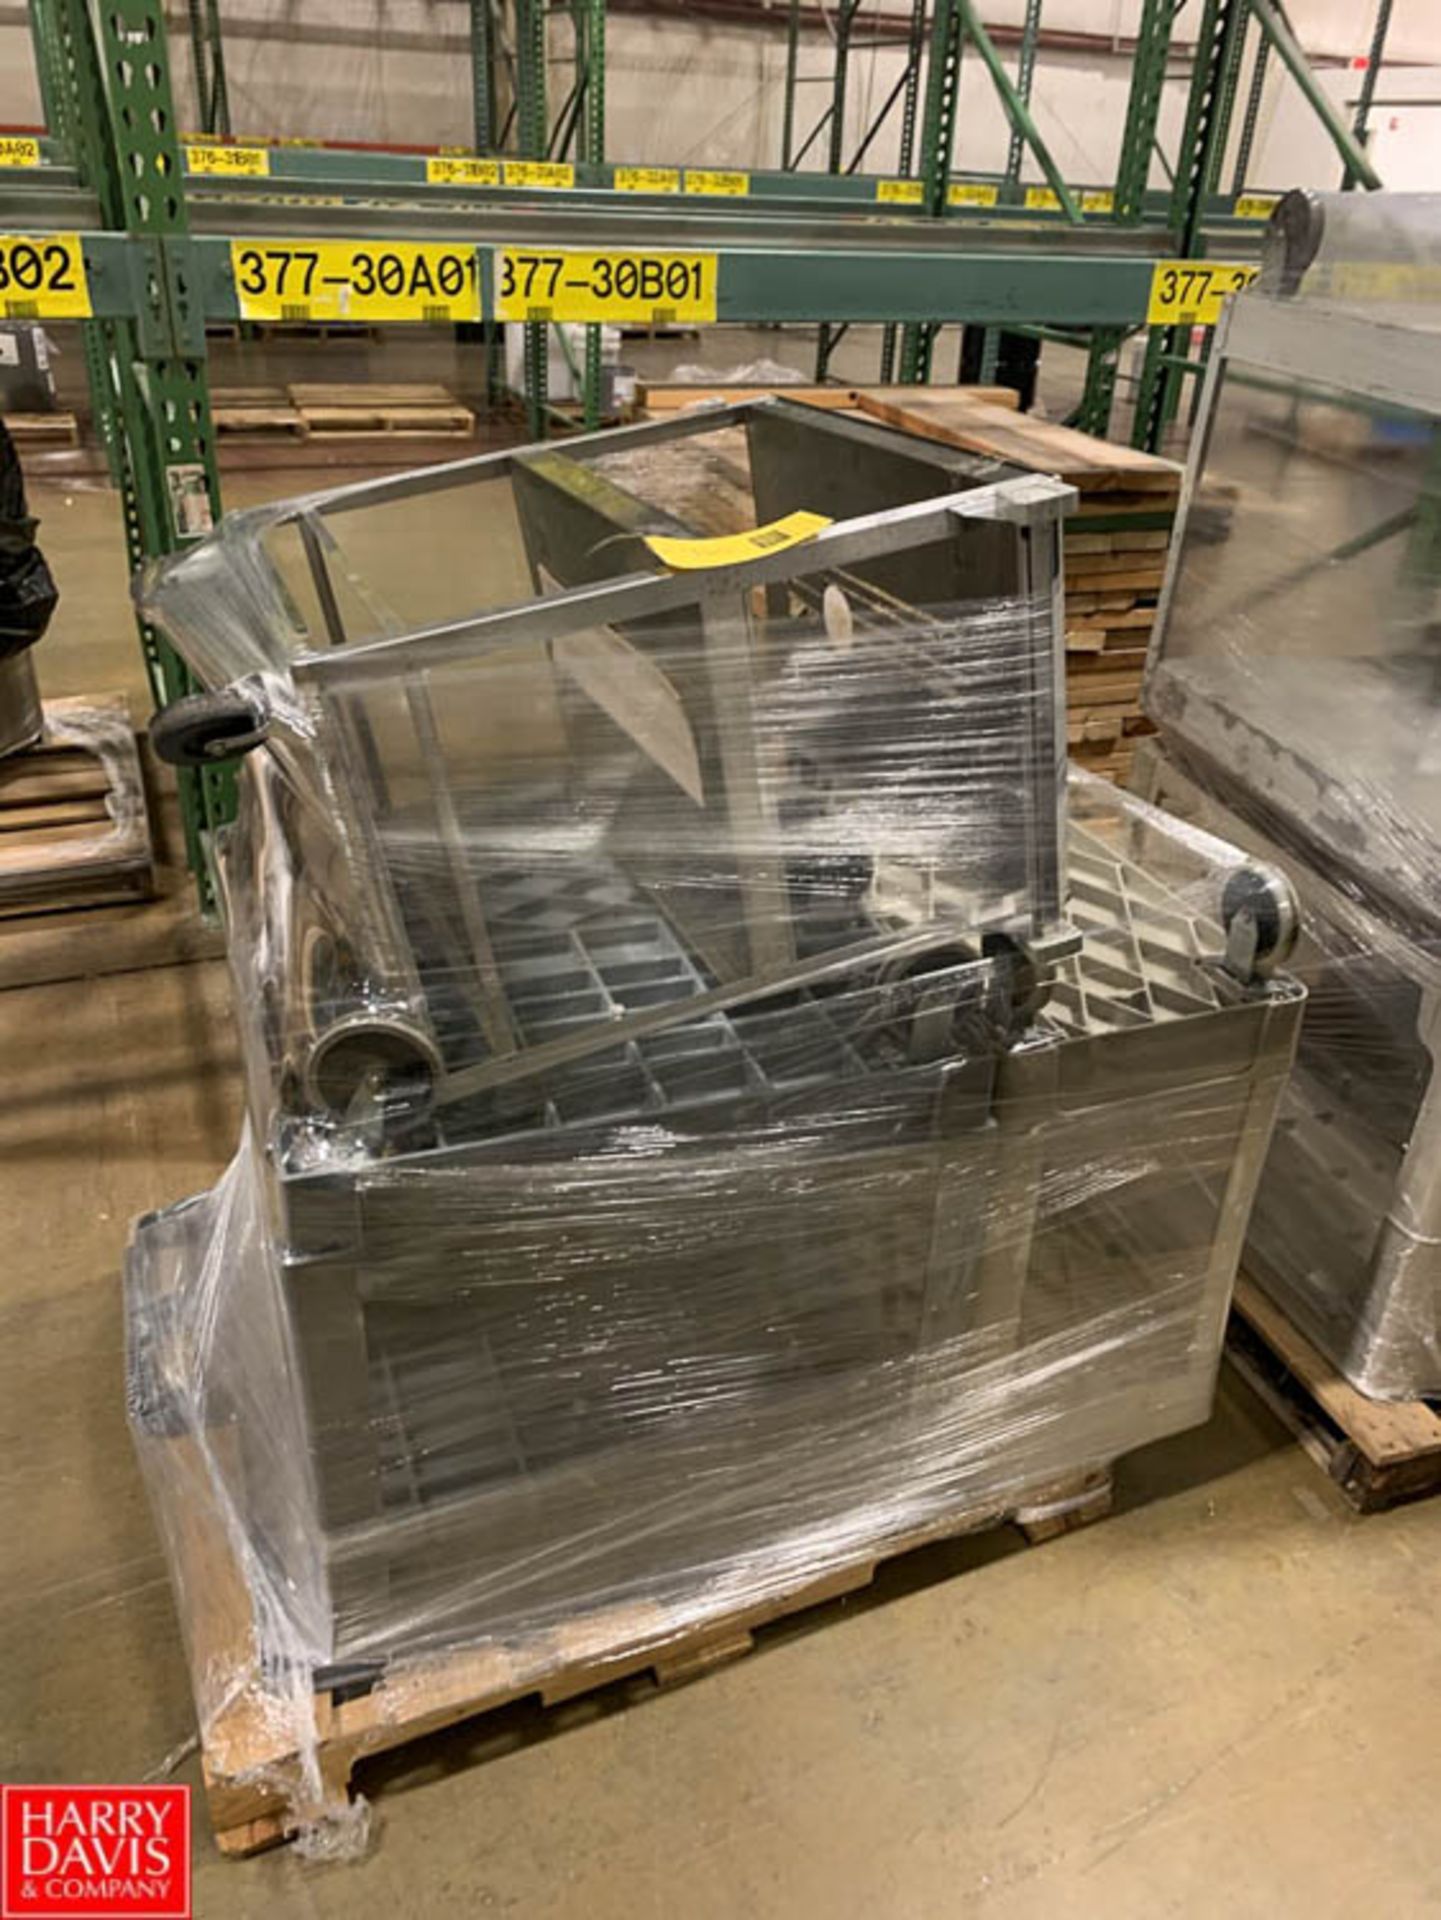 Pallet of Assorted Carts Rigging Fee: $20 ** , Removal will begin on March 9th**